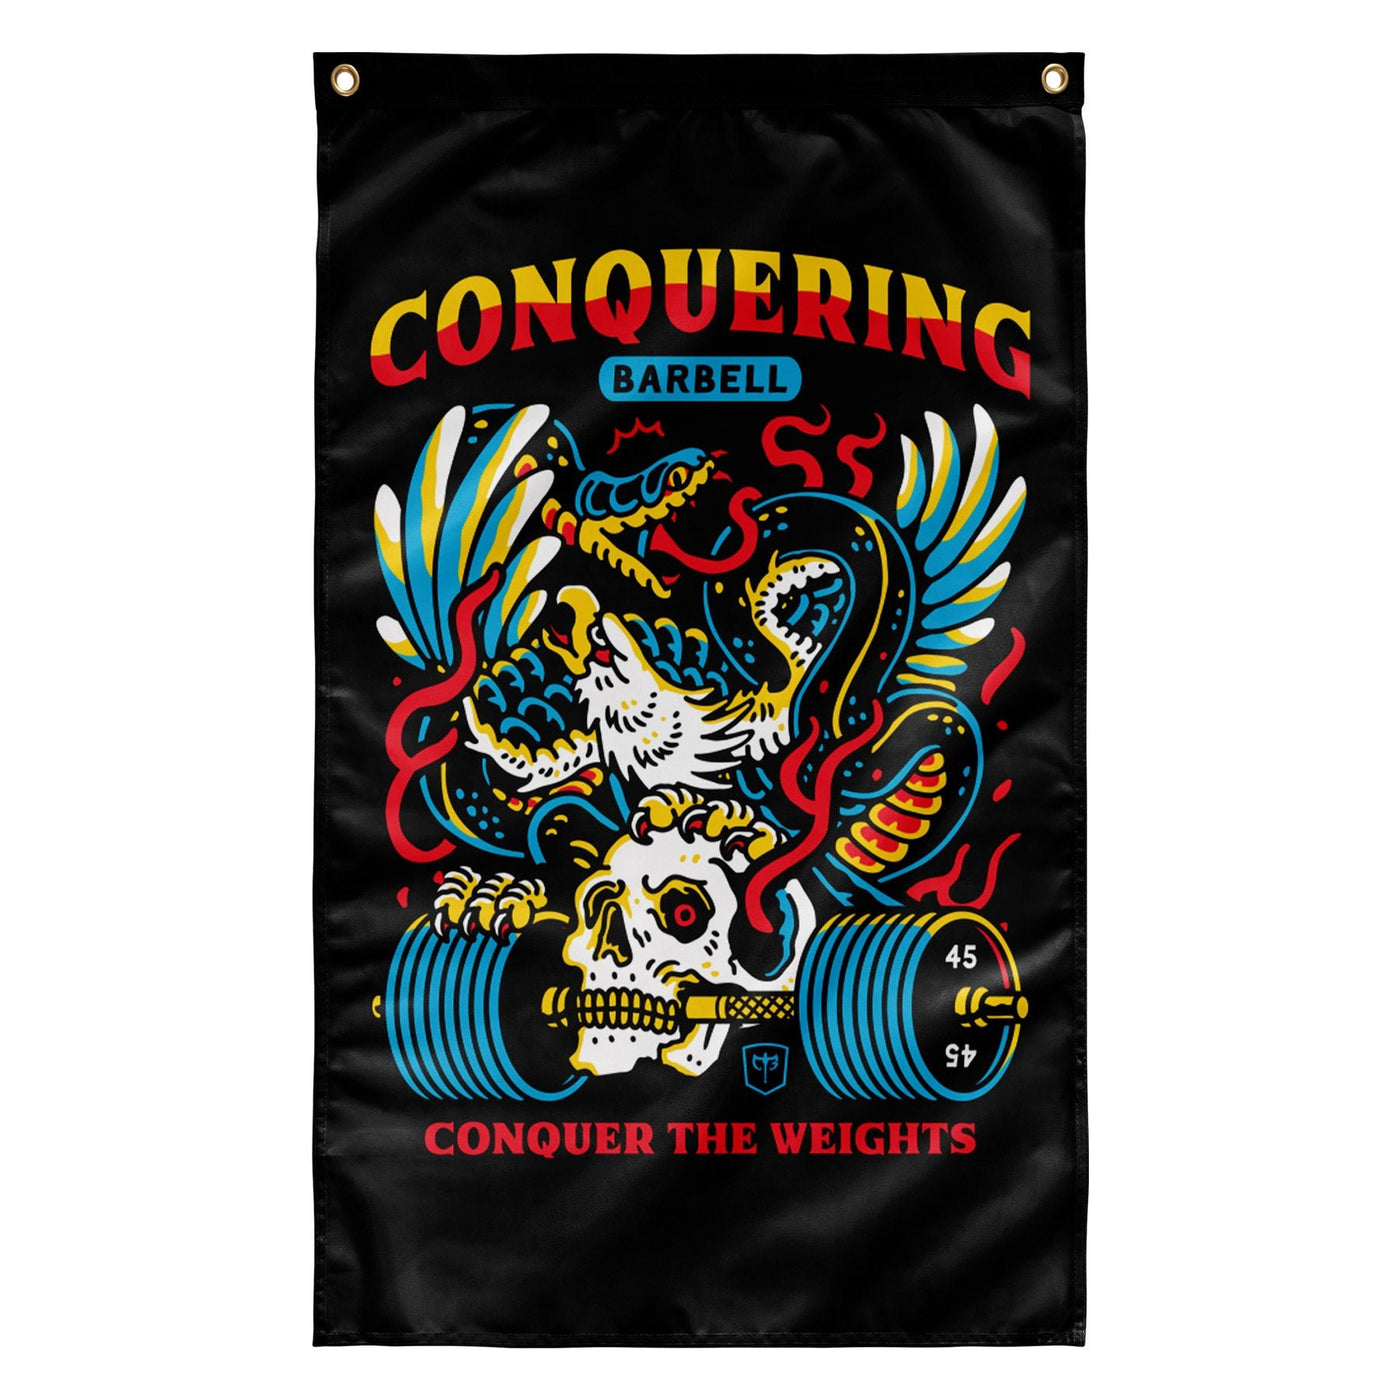 Conquer The Weights - Air Raid - 3' x 5' Polyester Flag - Conquering Barbell